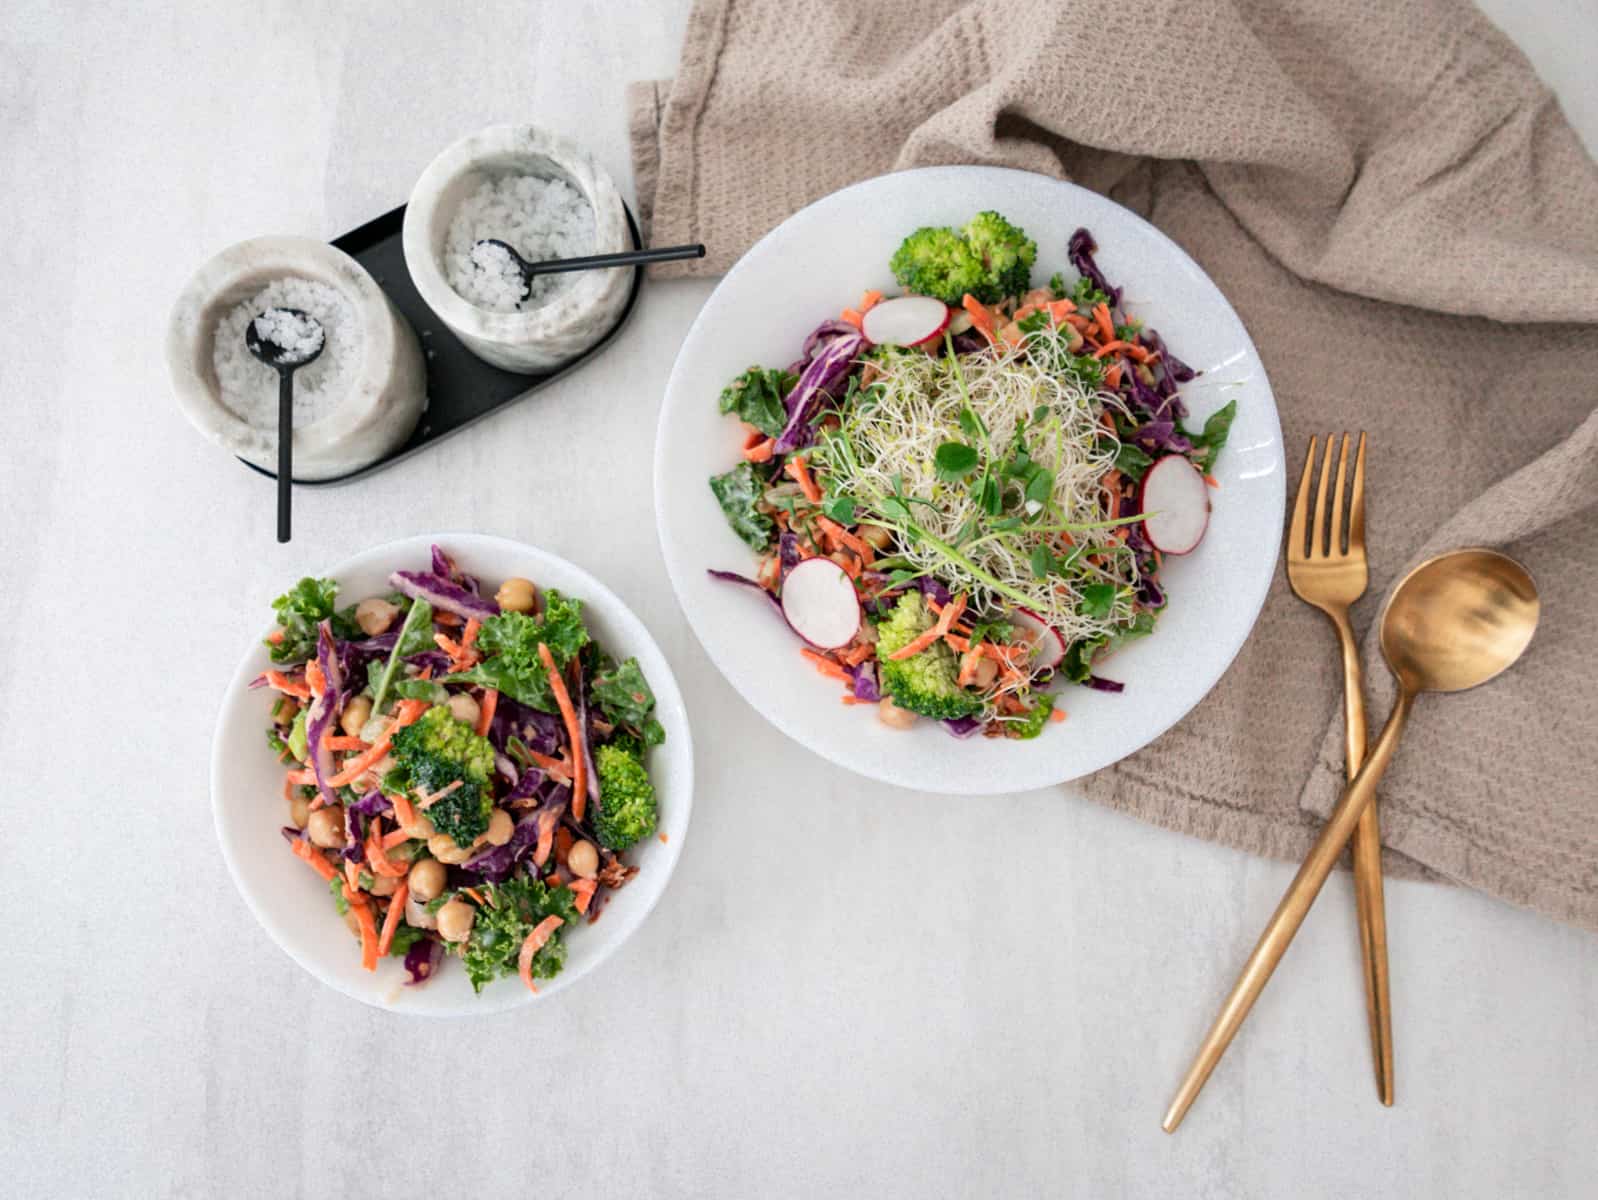 Easy Kale Salad Recipe with Carrots and Purple Cabbage Slaw